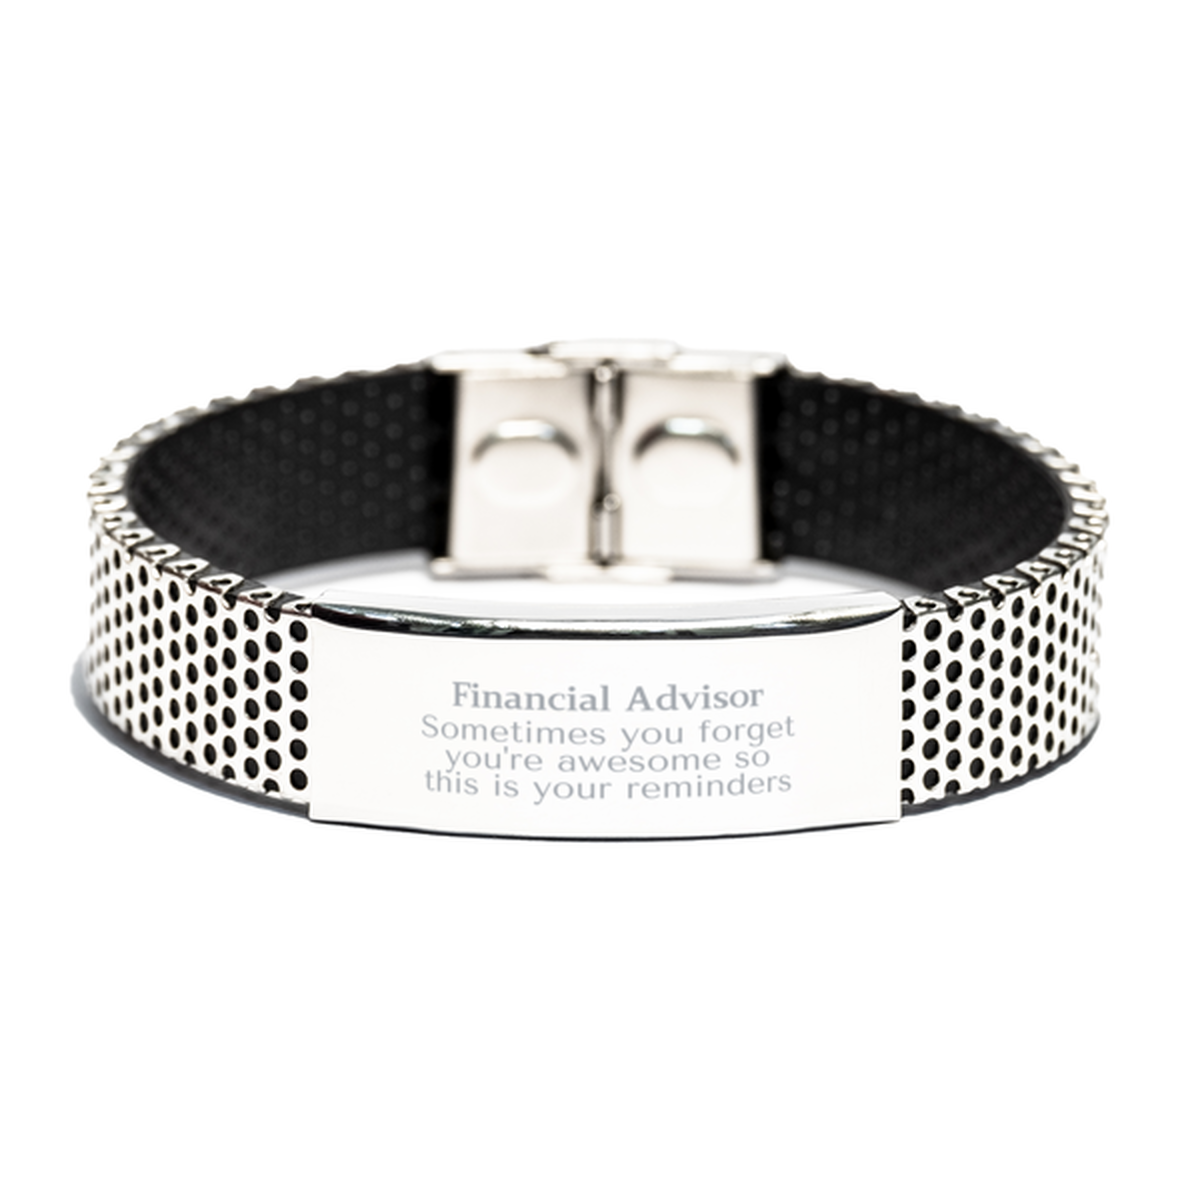 Sentimental Financial Advisor Stainless Steel Bracelet, Financial Advisor Sometimes you forget you're awesome so this is your reminders, Graduation Christmas Birthday Gifts for Financial Advisor, Men, Women, Coworkers